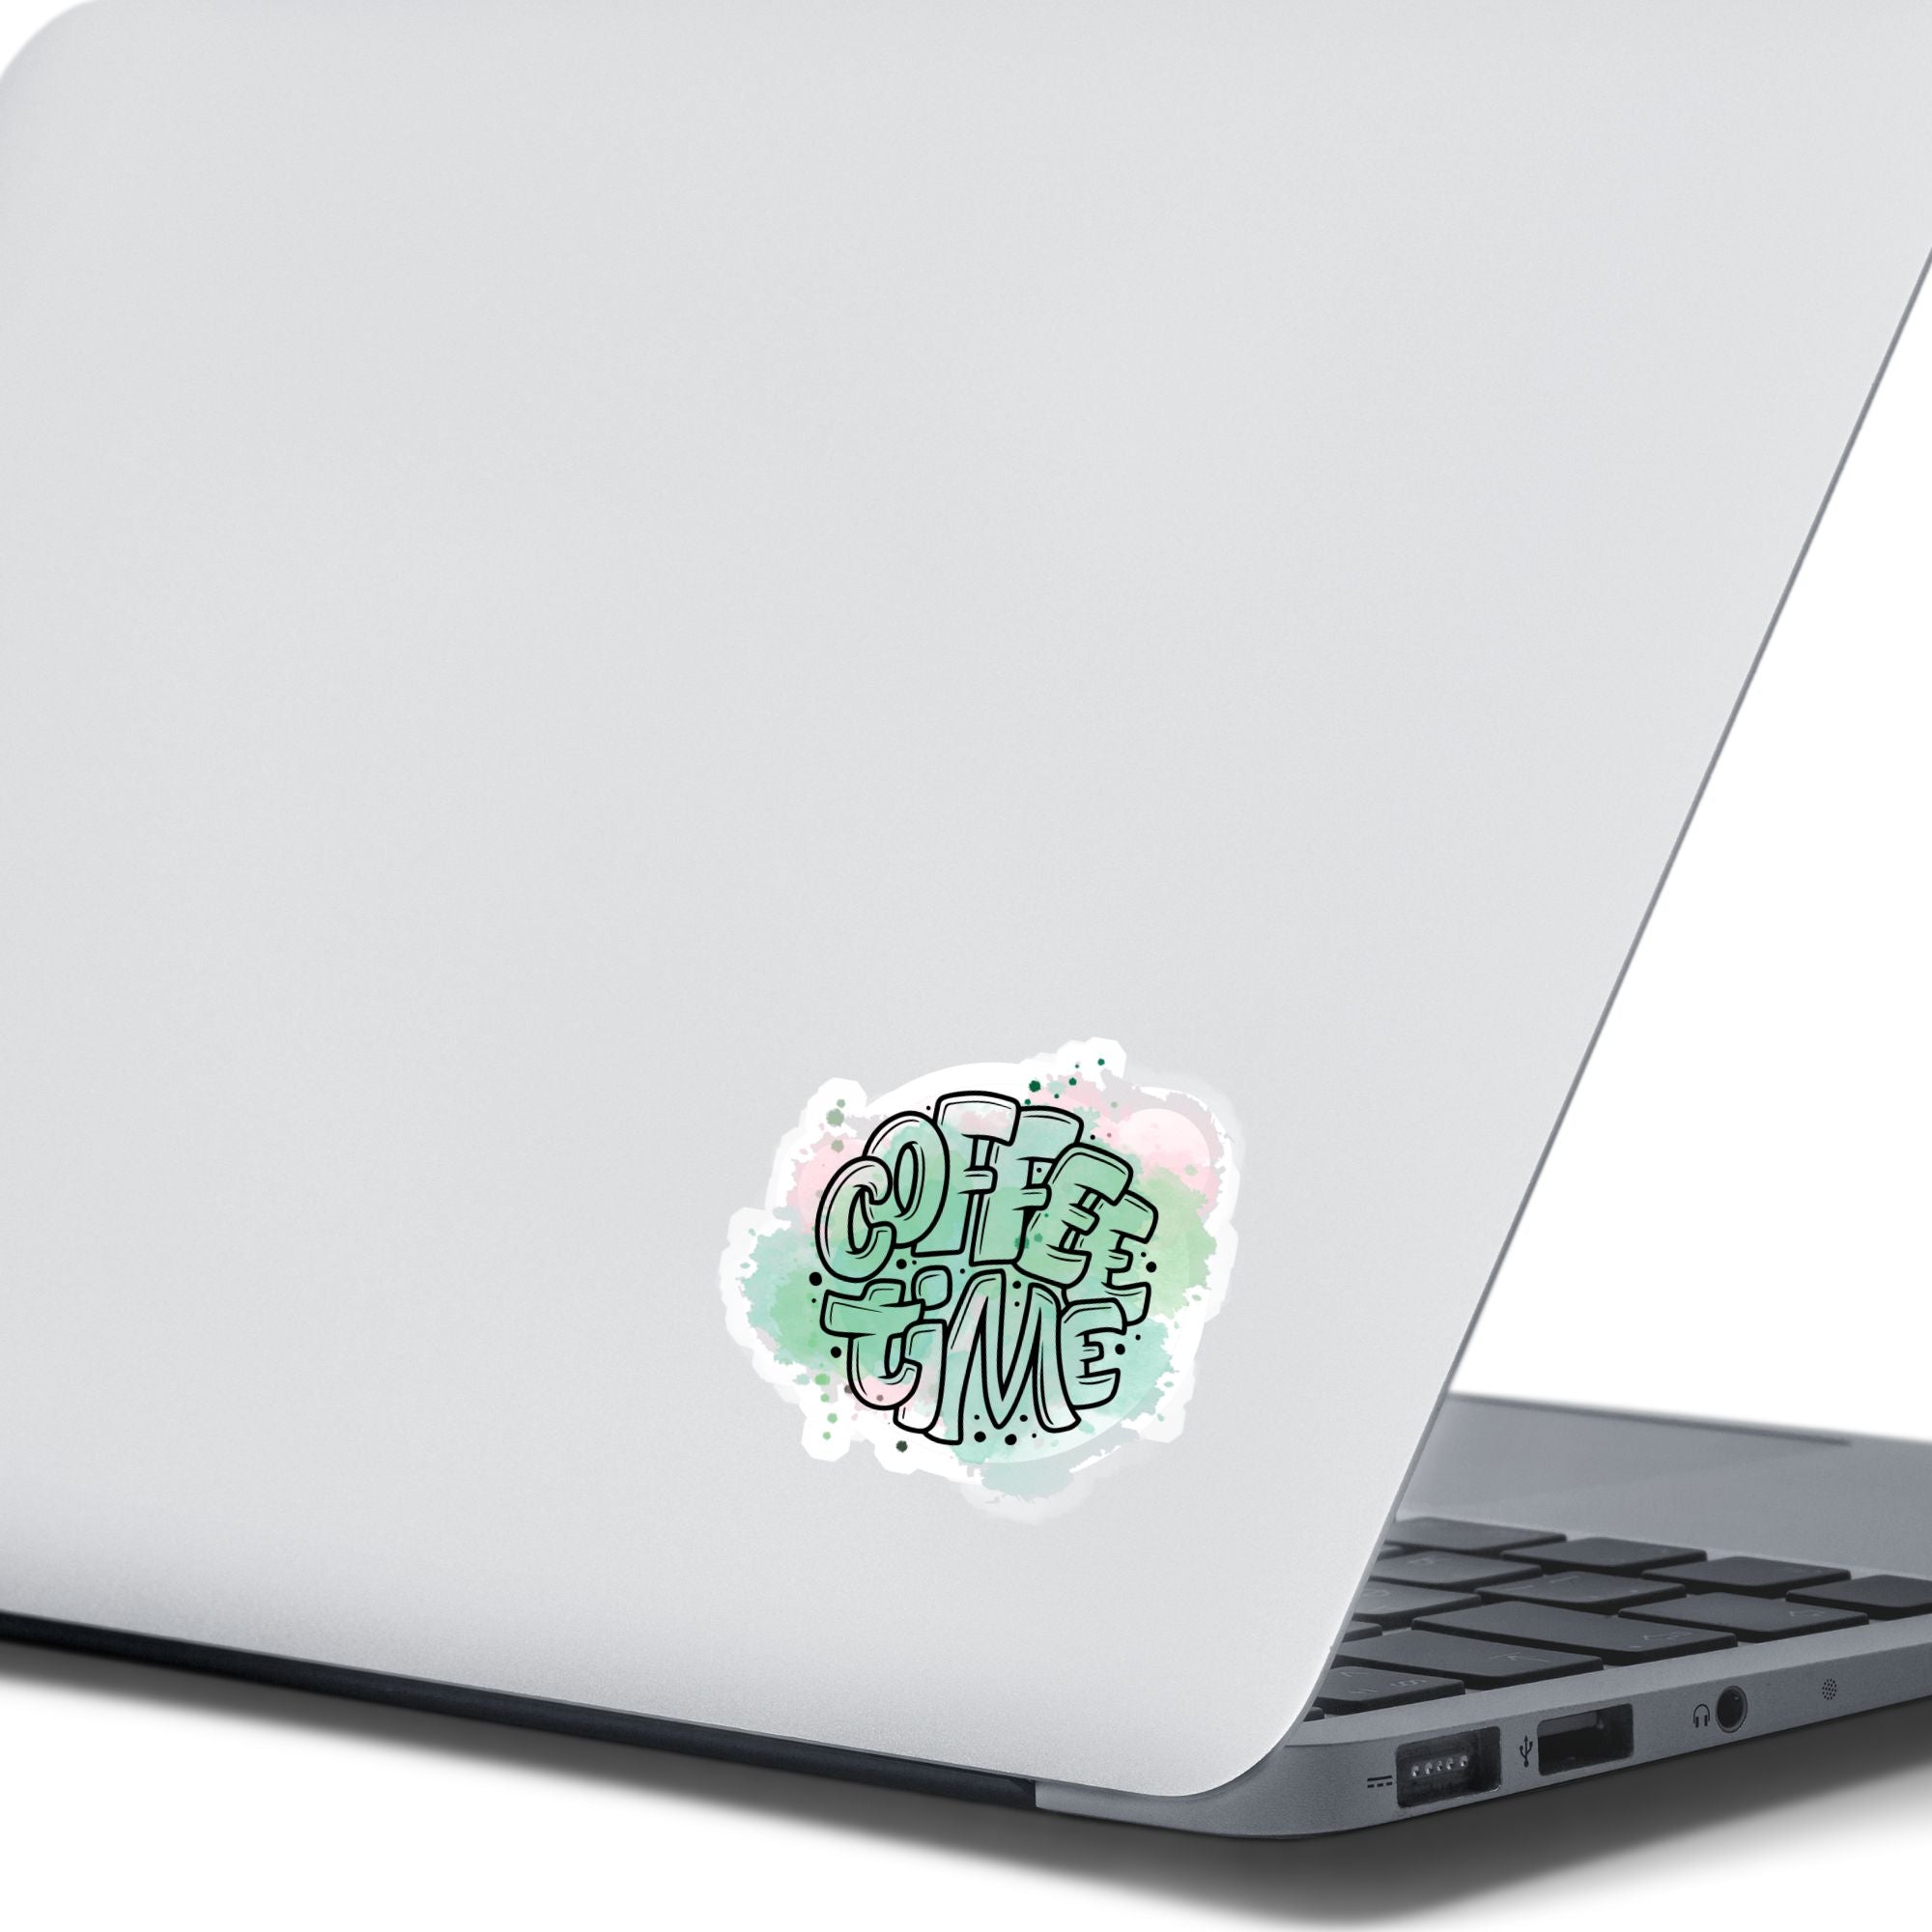 t's Coffee Time! This individual die-cut sticker features the words Coffee Time over a pastel green and pink background. This coffee sticker is great for all coffee lovers! This image shows the Coffee Time sticker on the back of an open laptop.